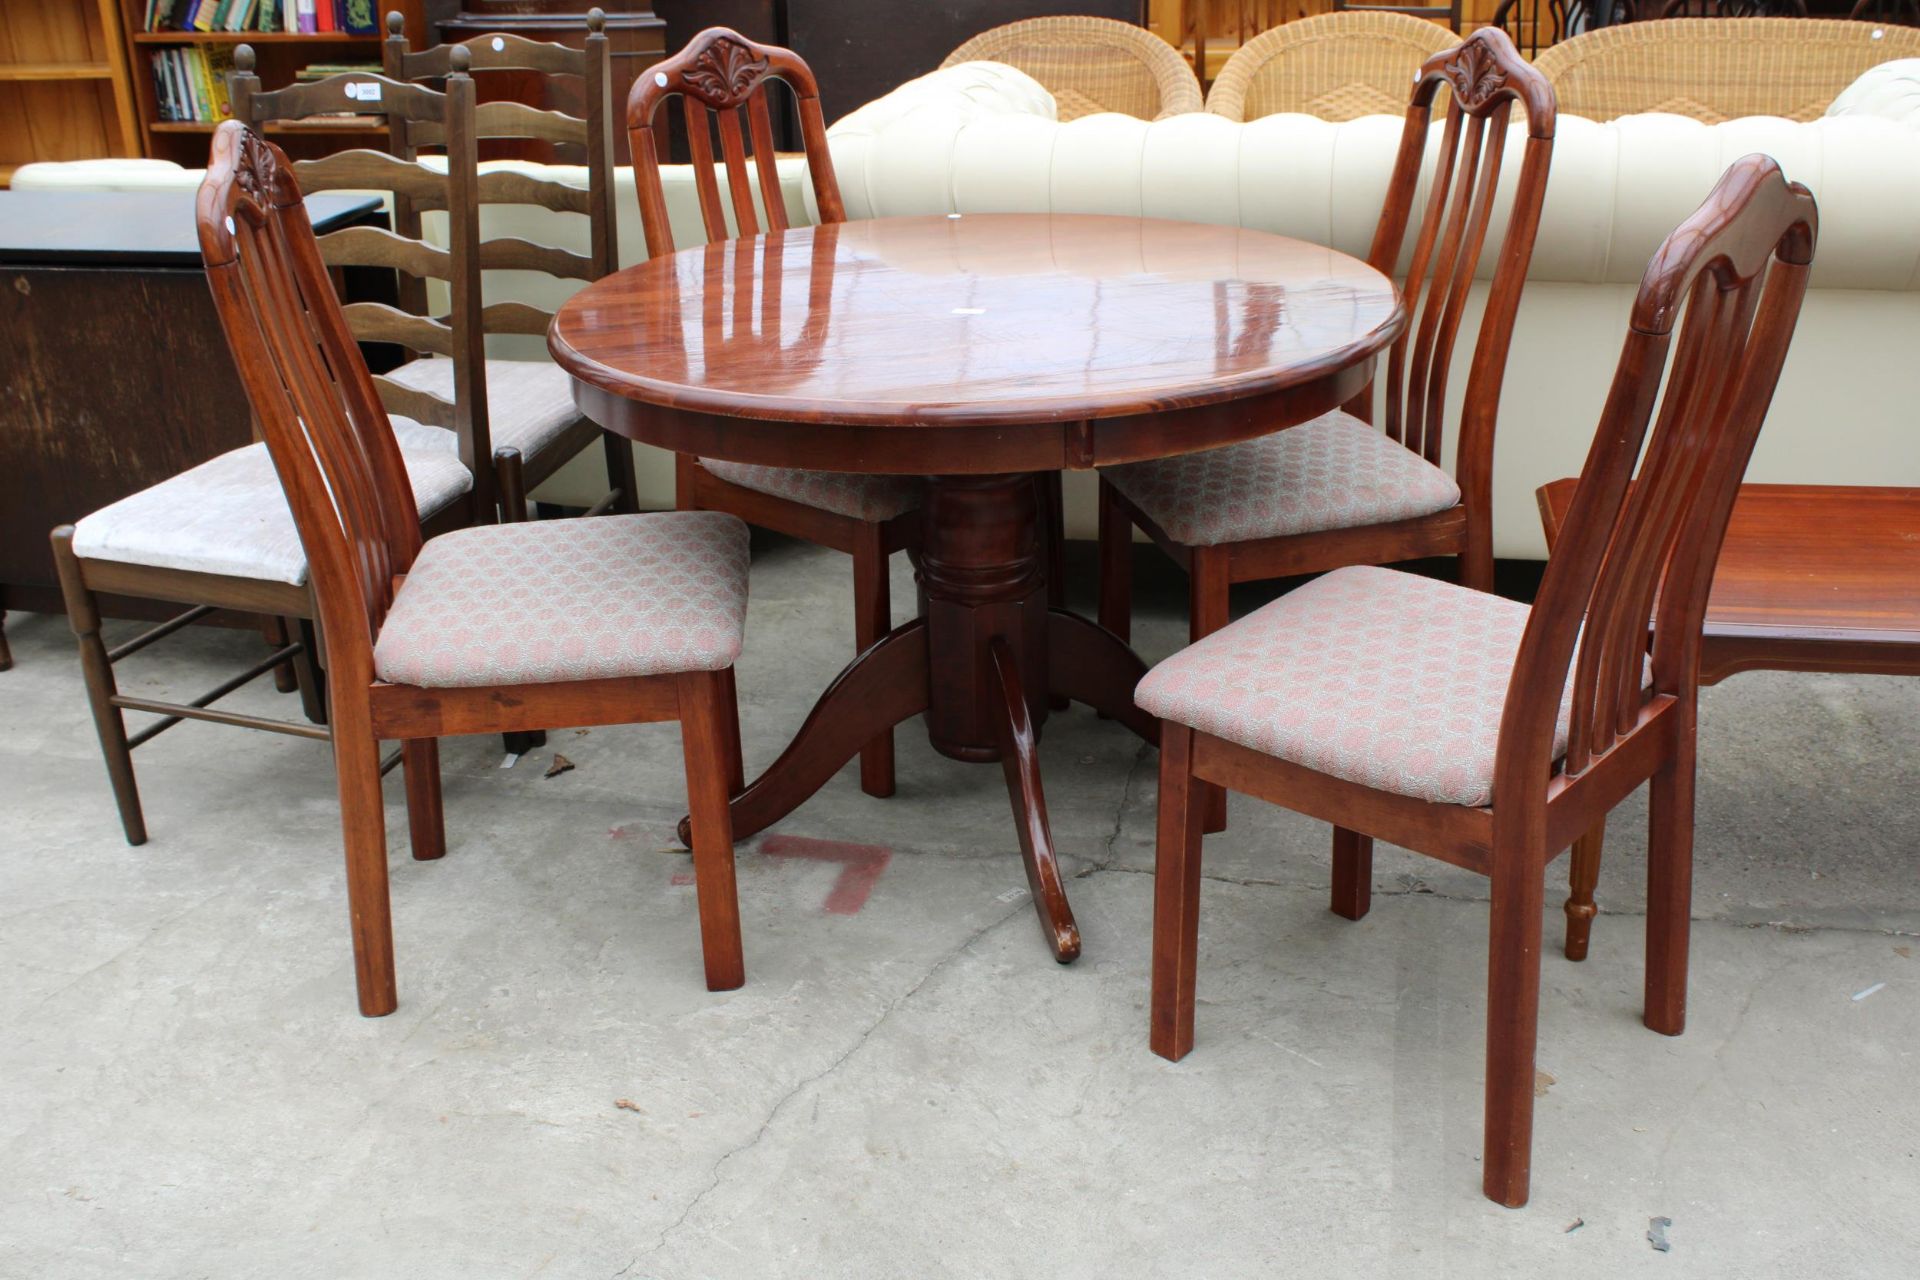 A MODERN POLISHED 42" DIAMETER DINING TABLE AND FOUR CHAIRS - Image 2 of 4